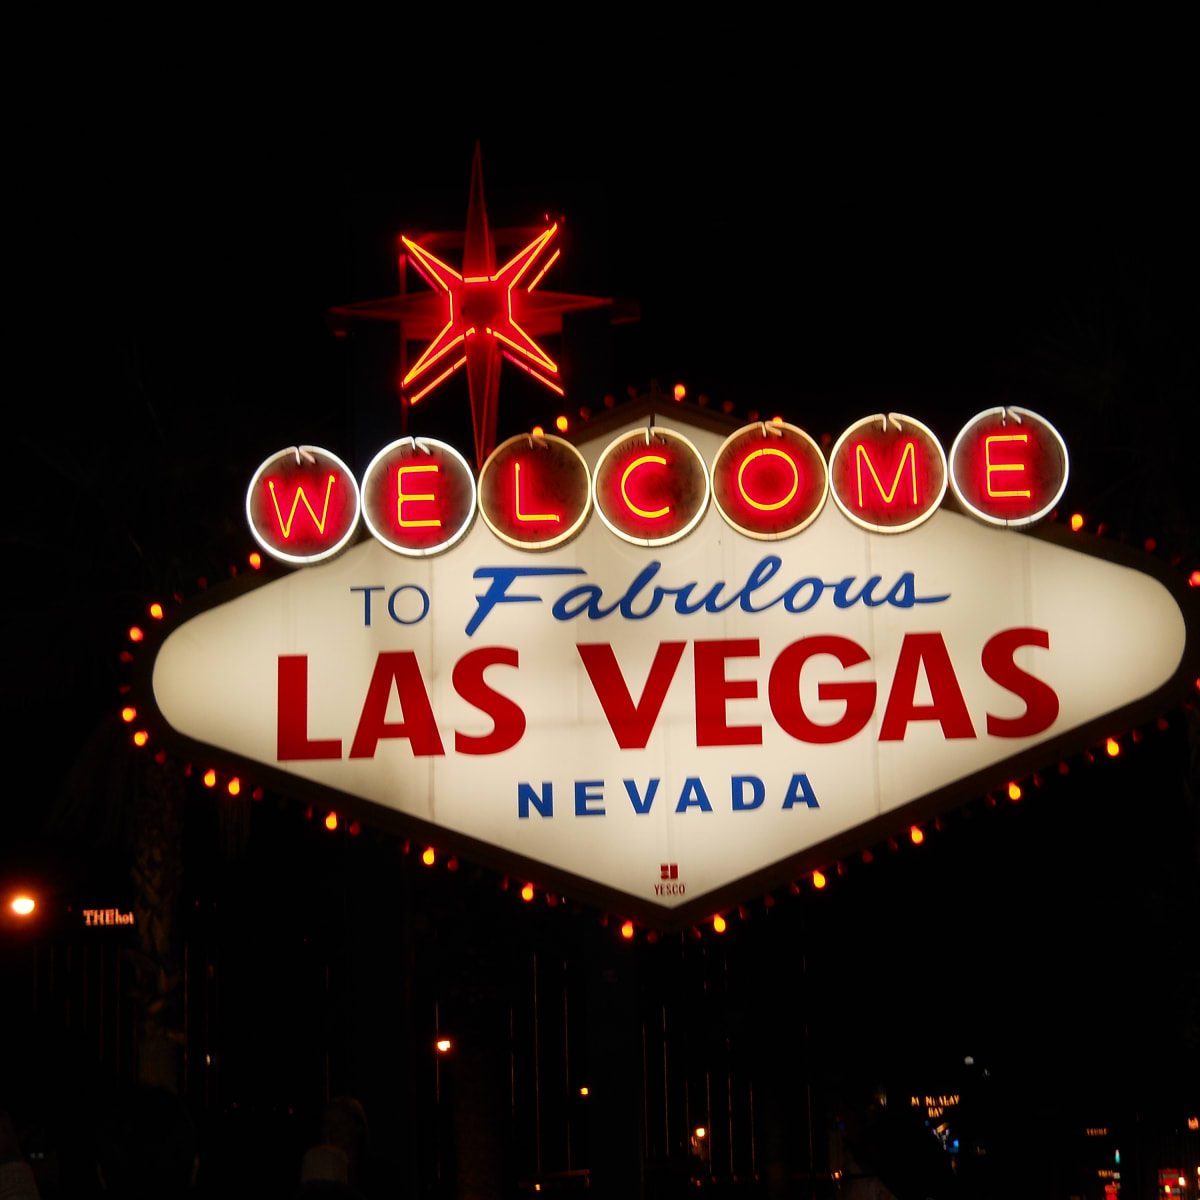 No "Welcome to Las Vegas" memes have been featured yet. 